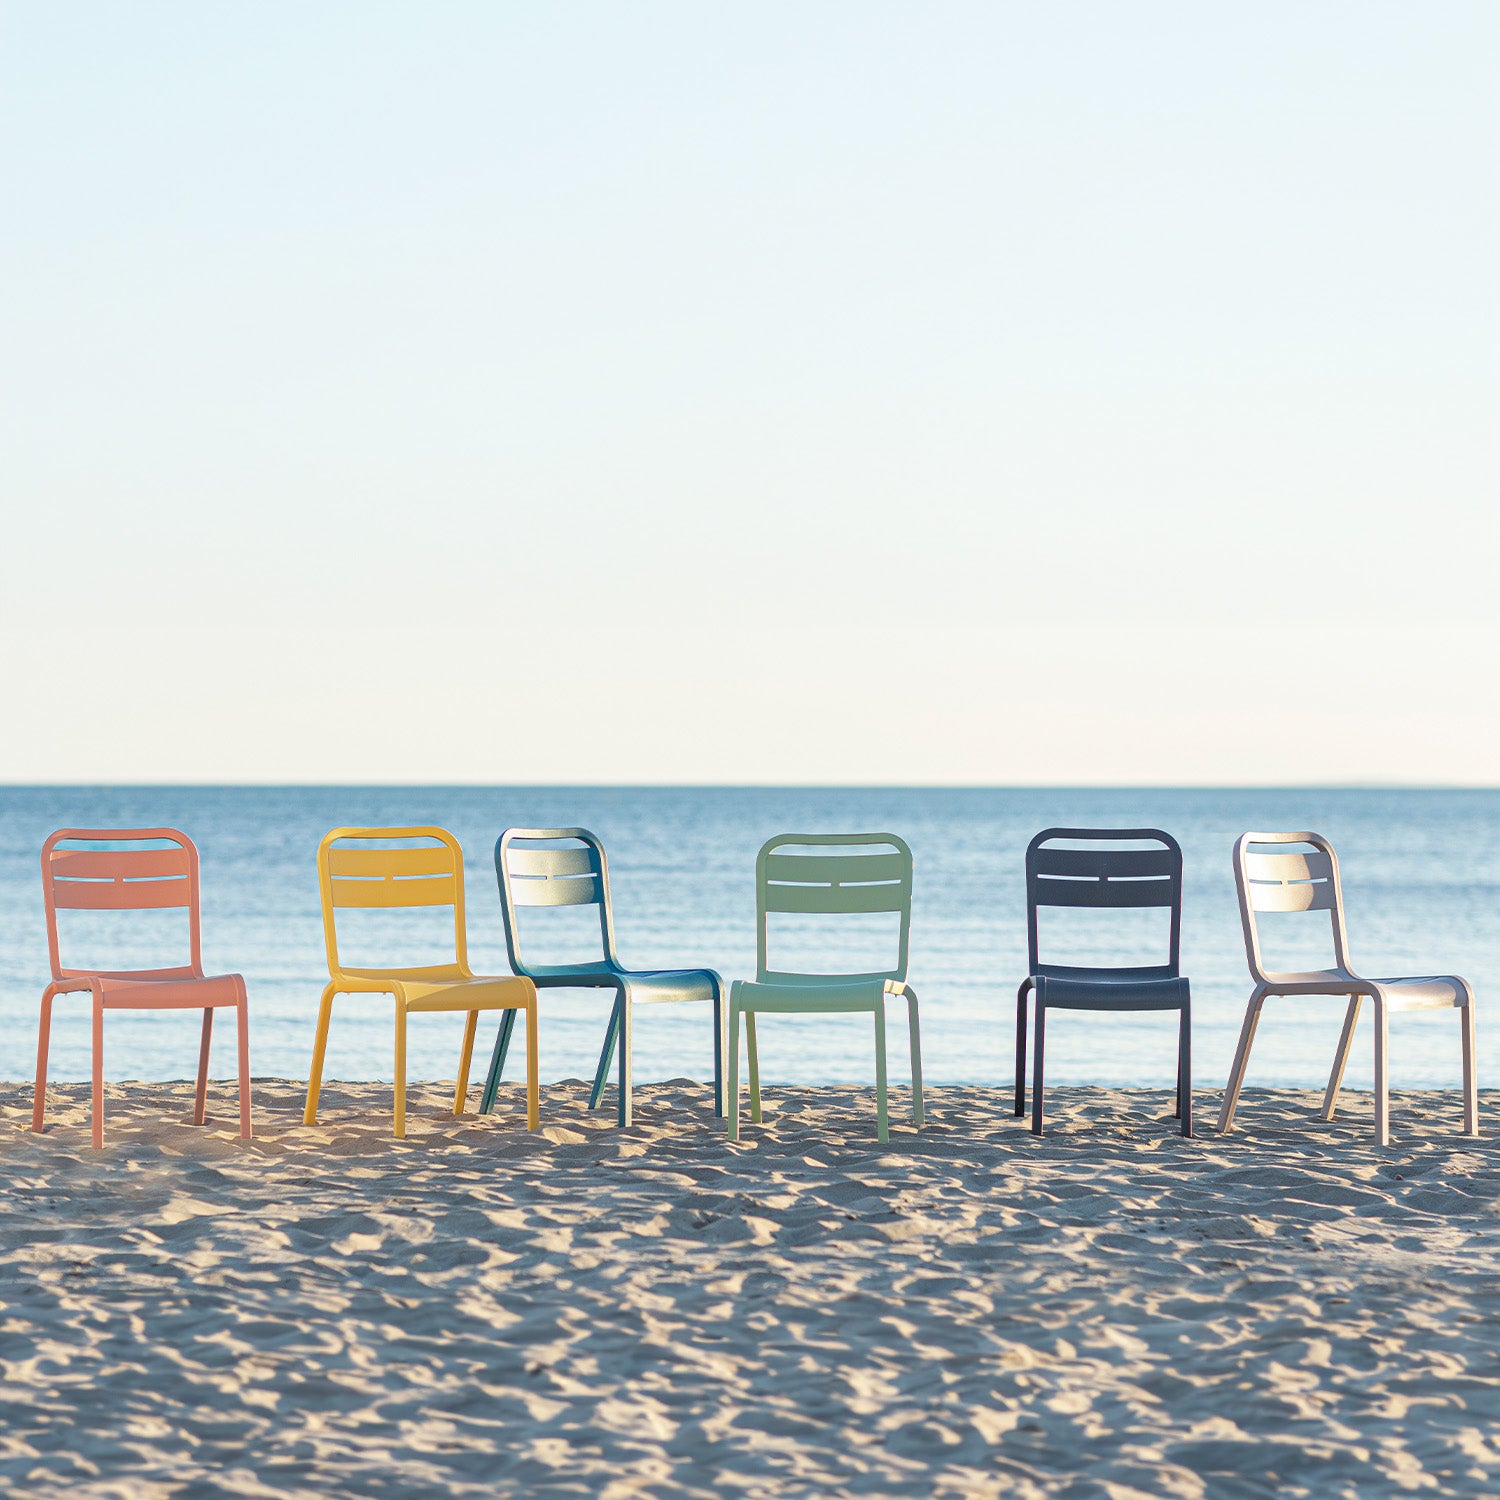 The Hues You Choose – The “Art” of Color Selection in Outdoor Furniture Design